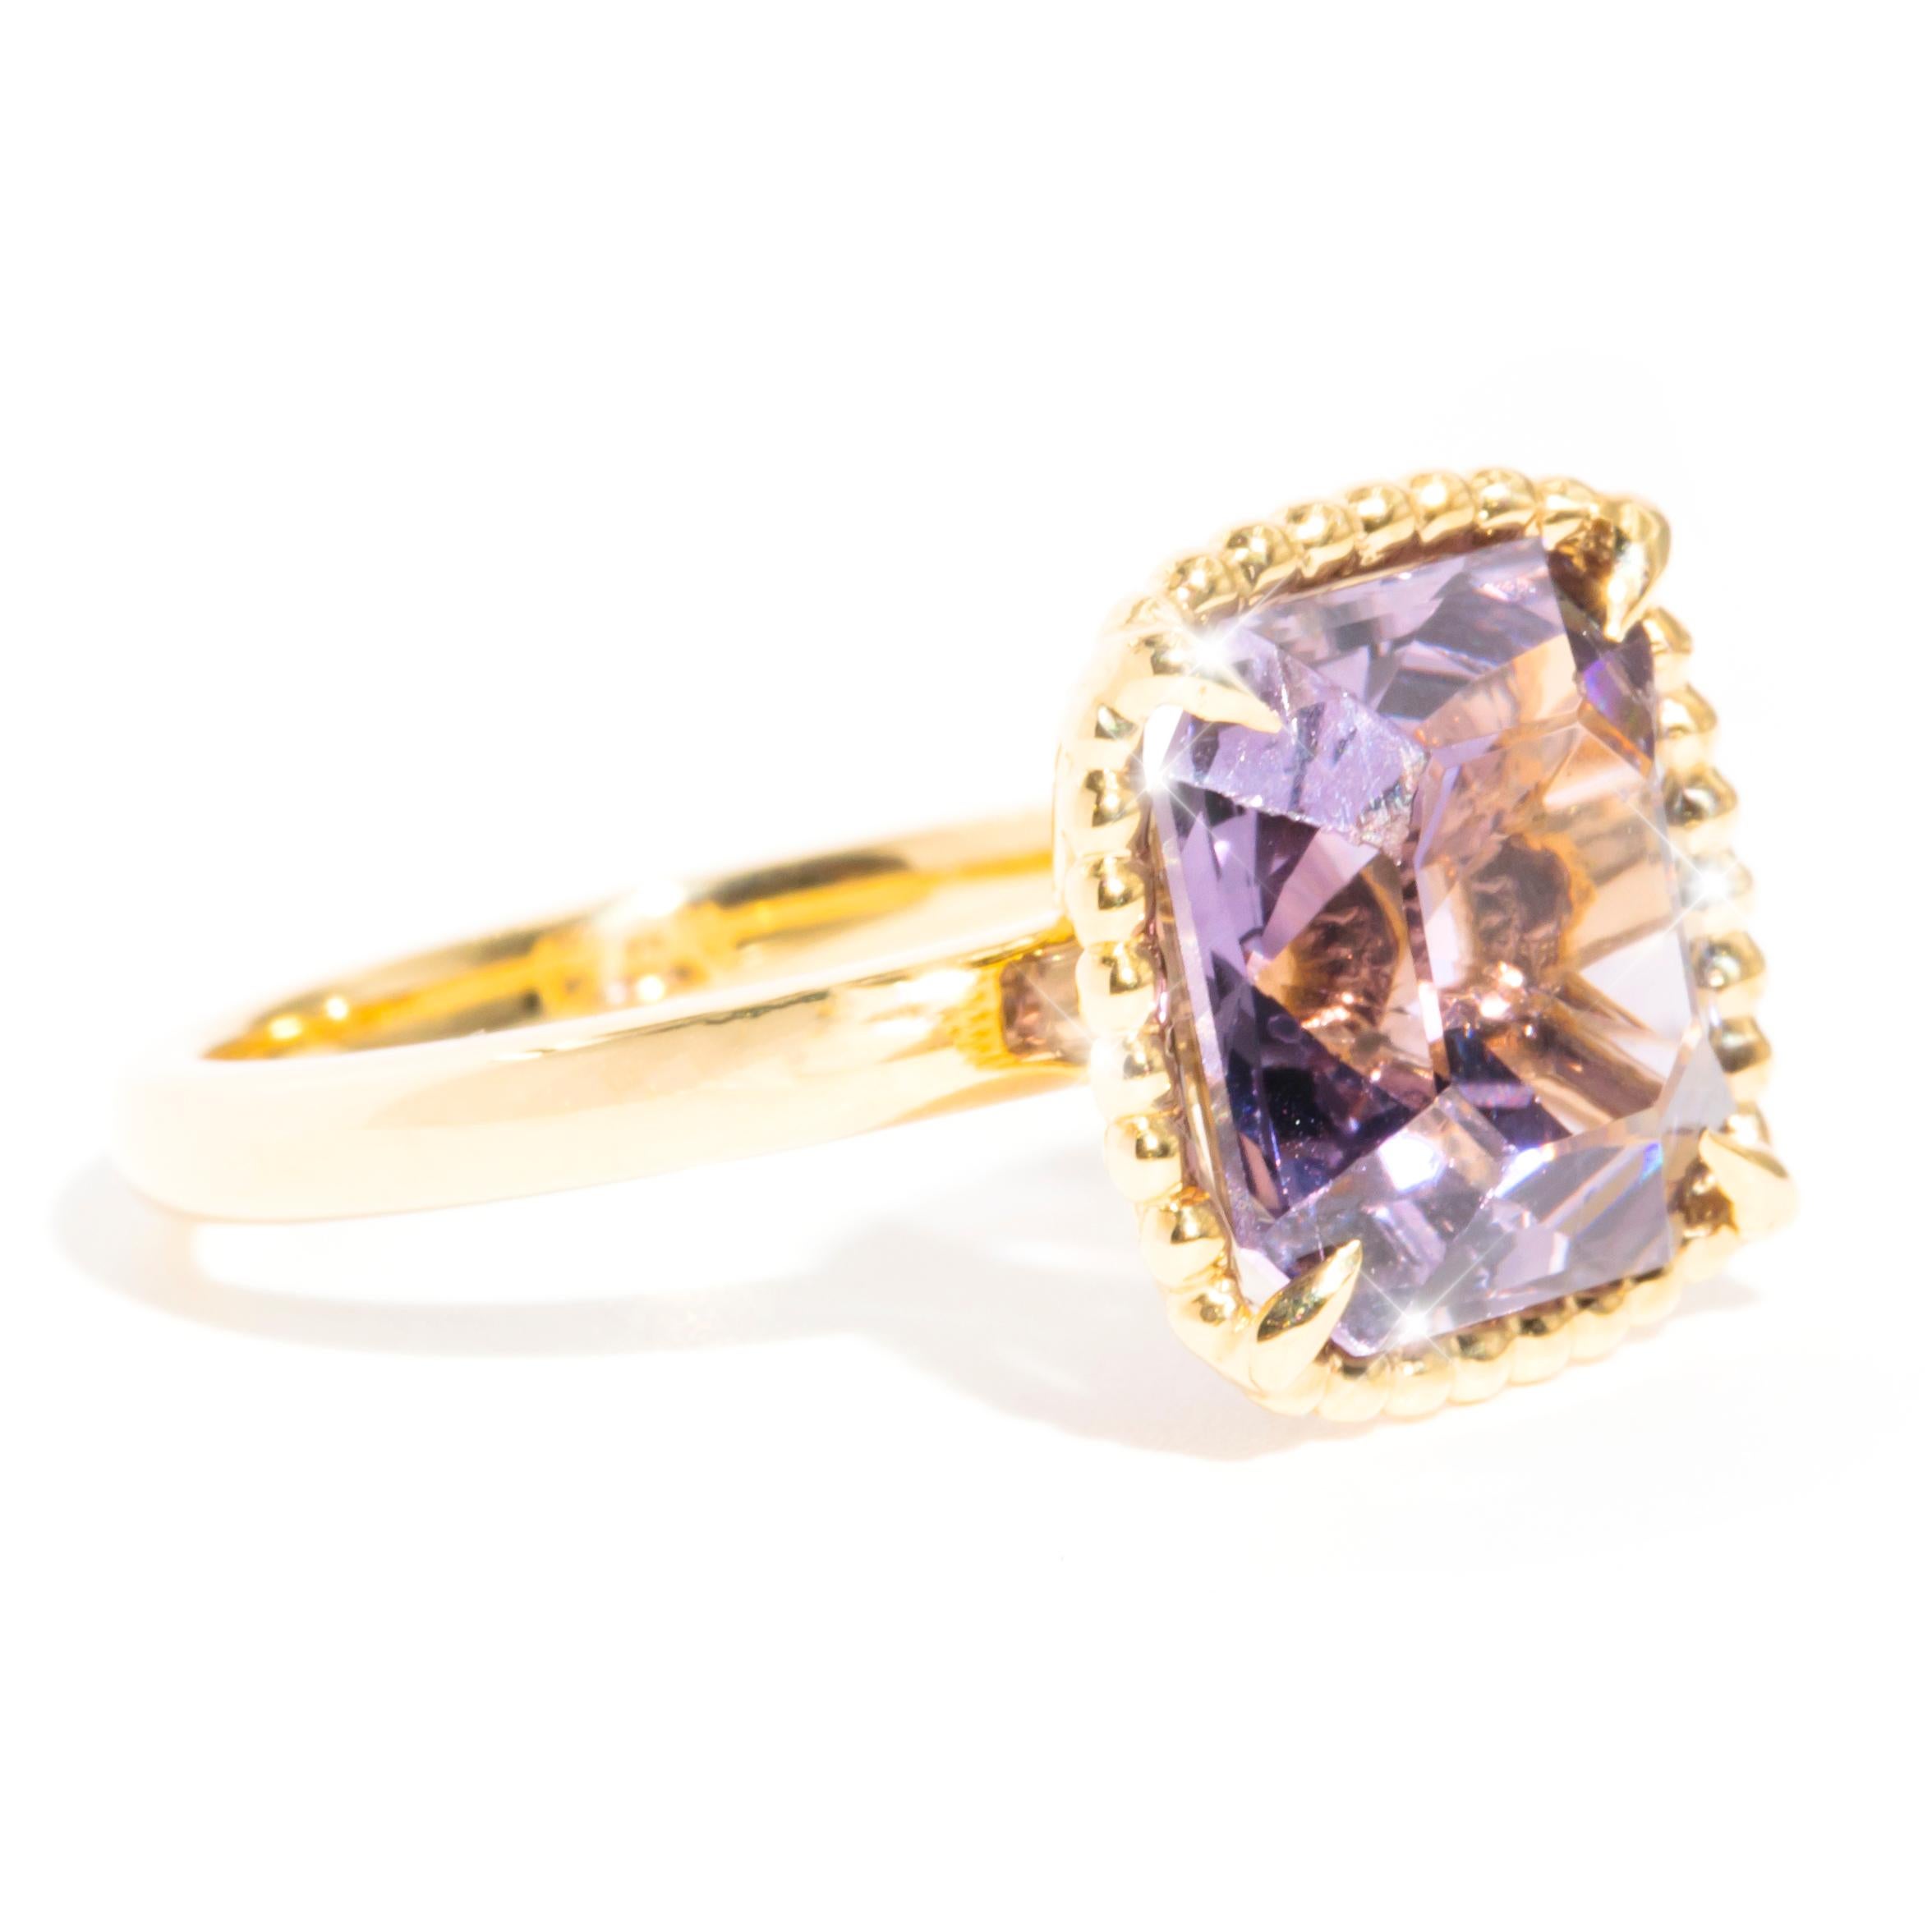 4.86 Carat Asscher Cut Purple Spinel 18 Carat Yellow Gold Vintage Cluster Ring In Good Condition For Sale In Hamilton, AU